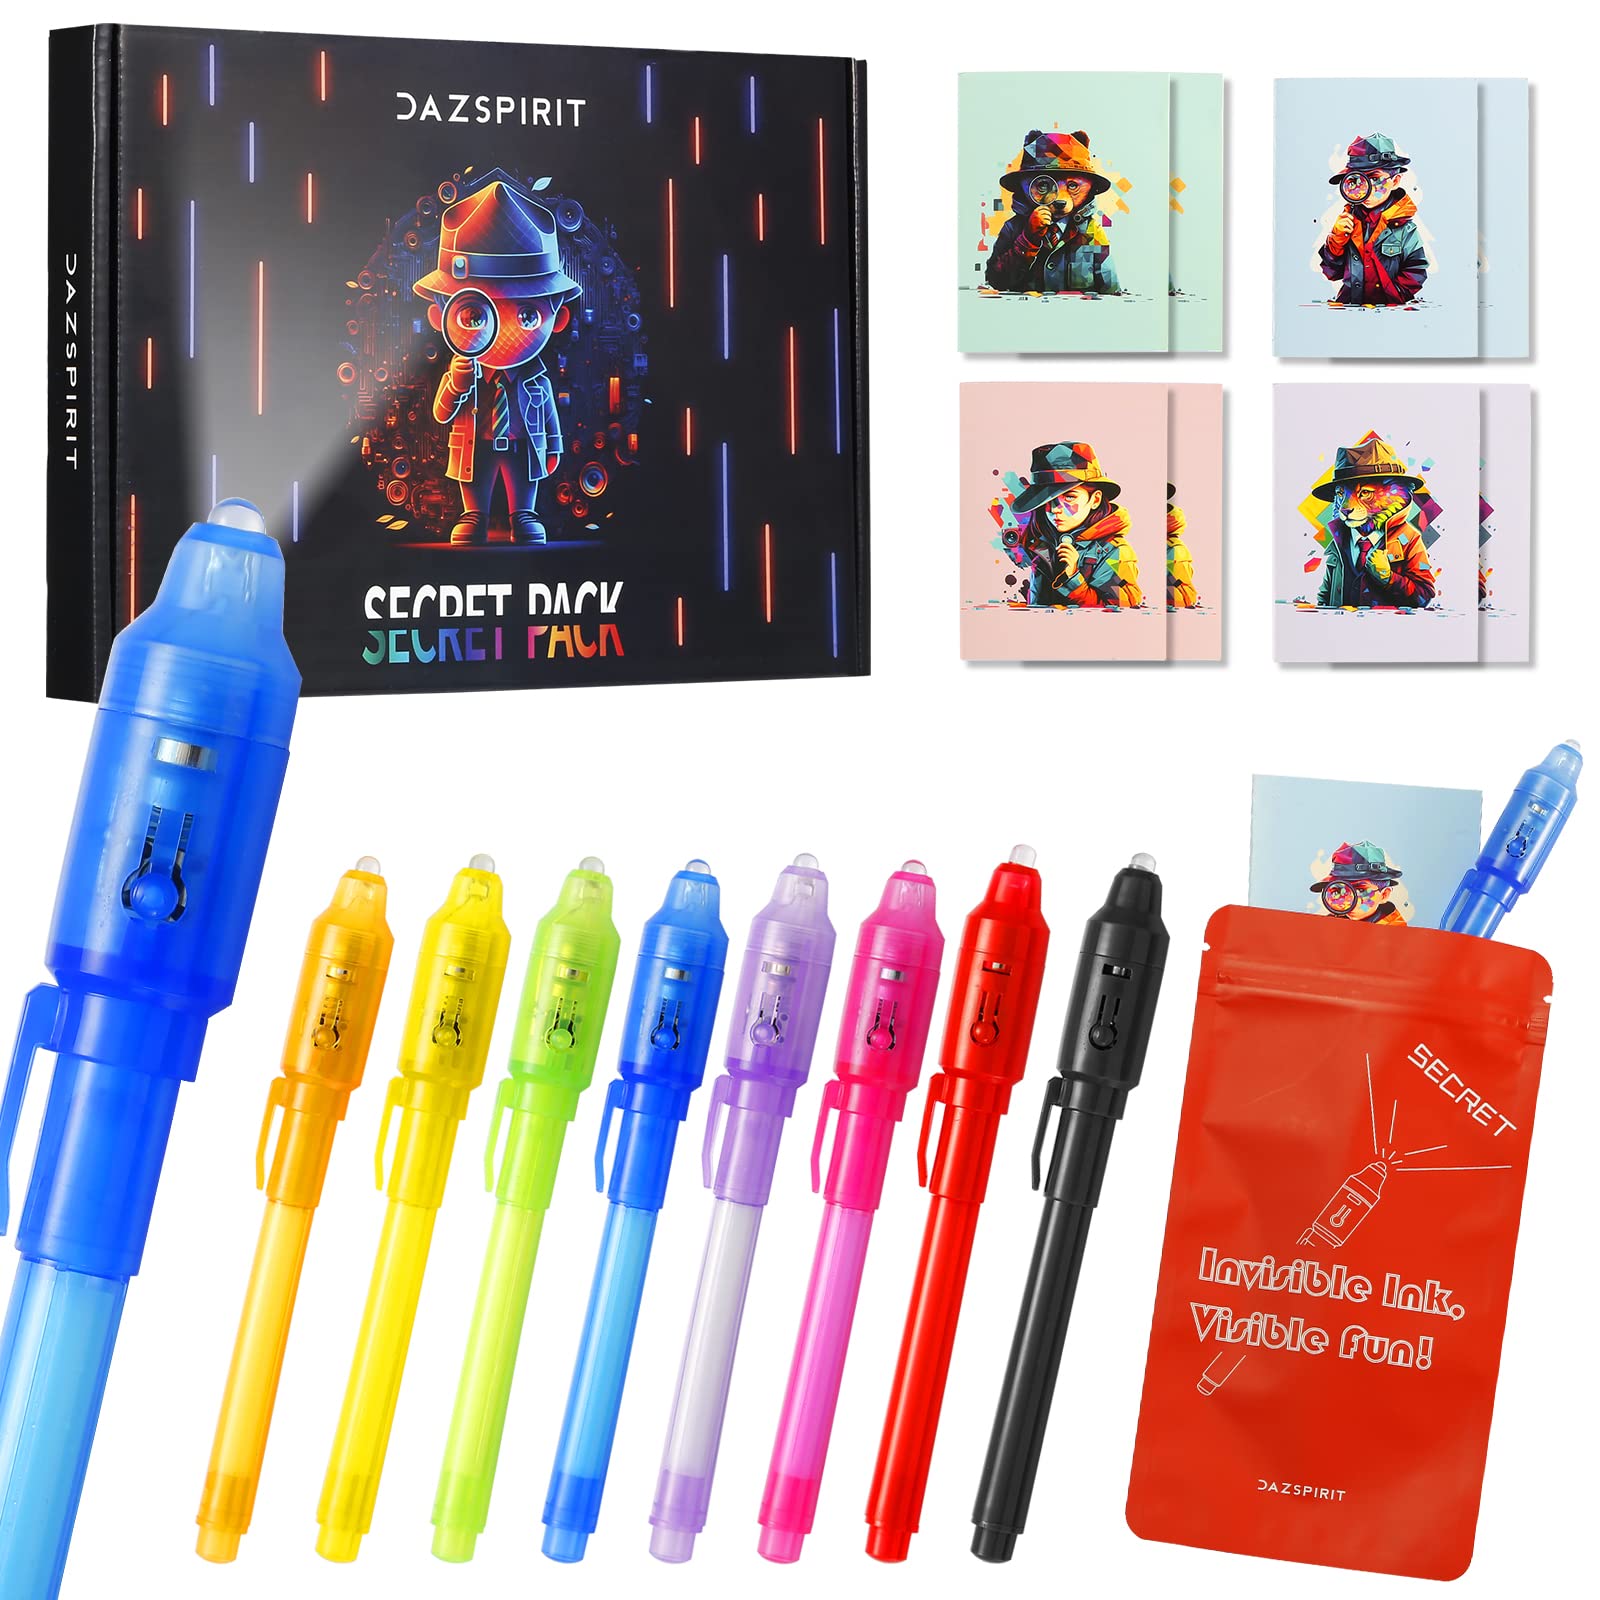 DazSpirit 8Pcs Invisible Ink Pen Set with UV Light, Mini Notepads & gift Bags, Magic Pen Disappearing Ink, Spy Pens for Kids, Fu